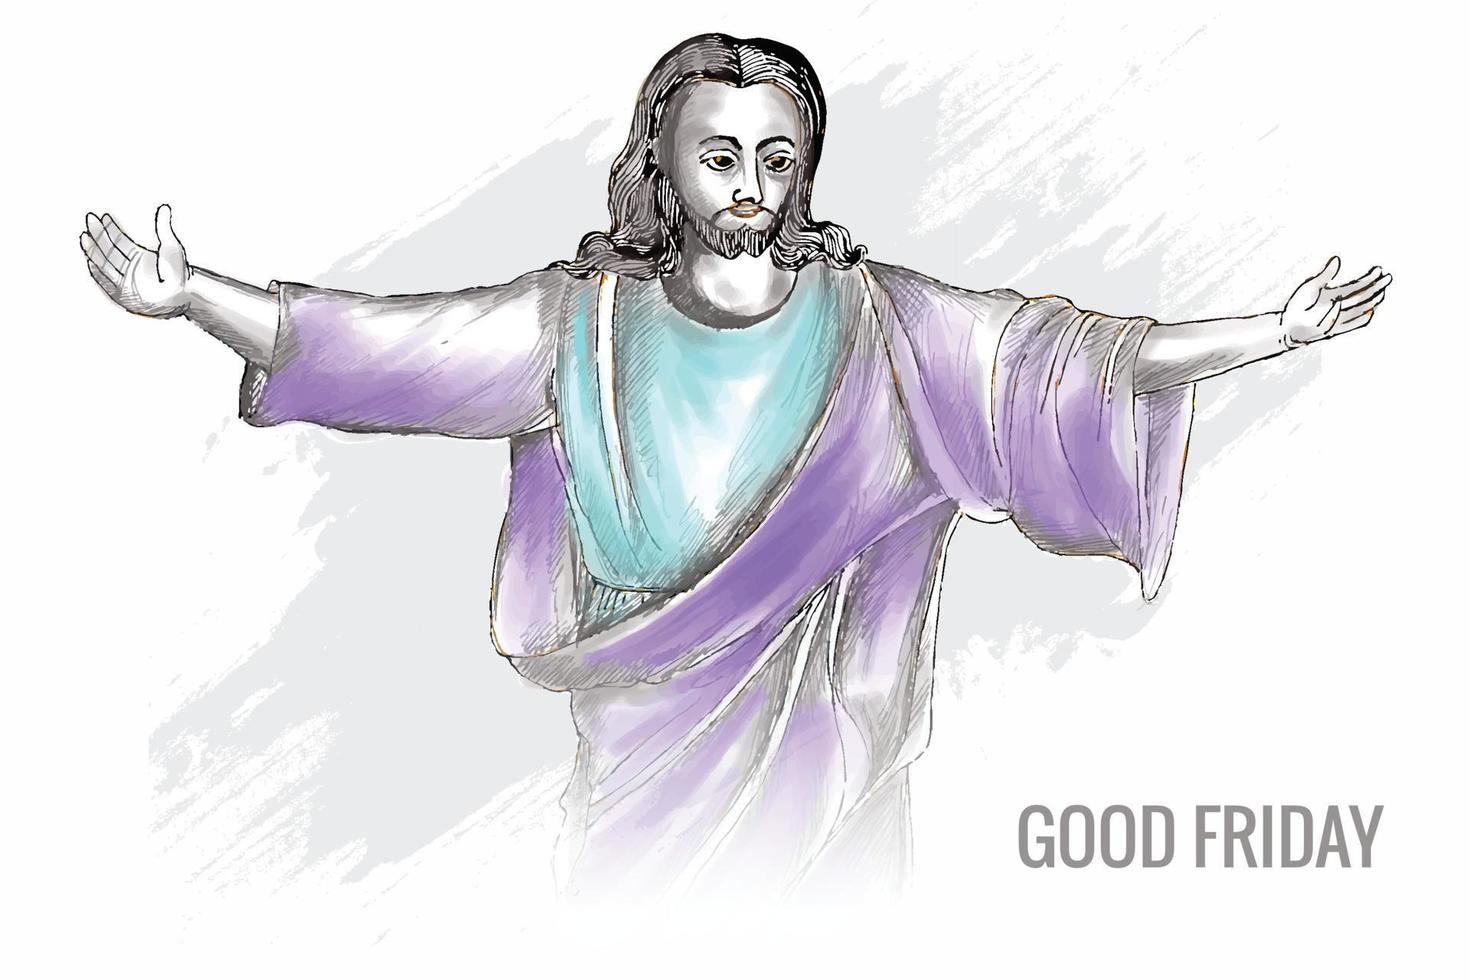 Hand draw sketch good friday with jesus christ the son of god card background vector